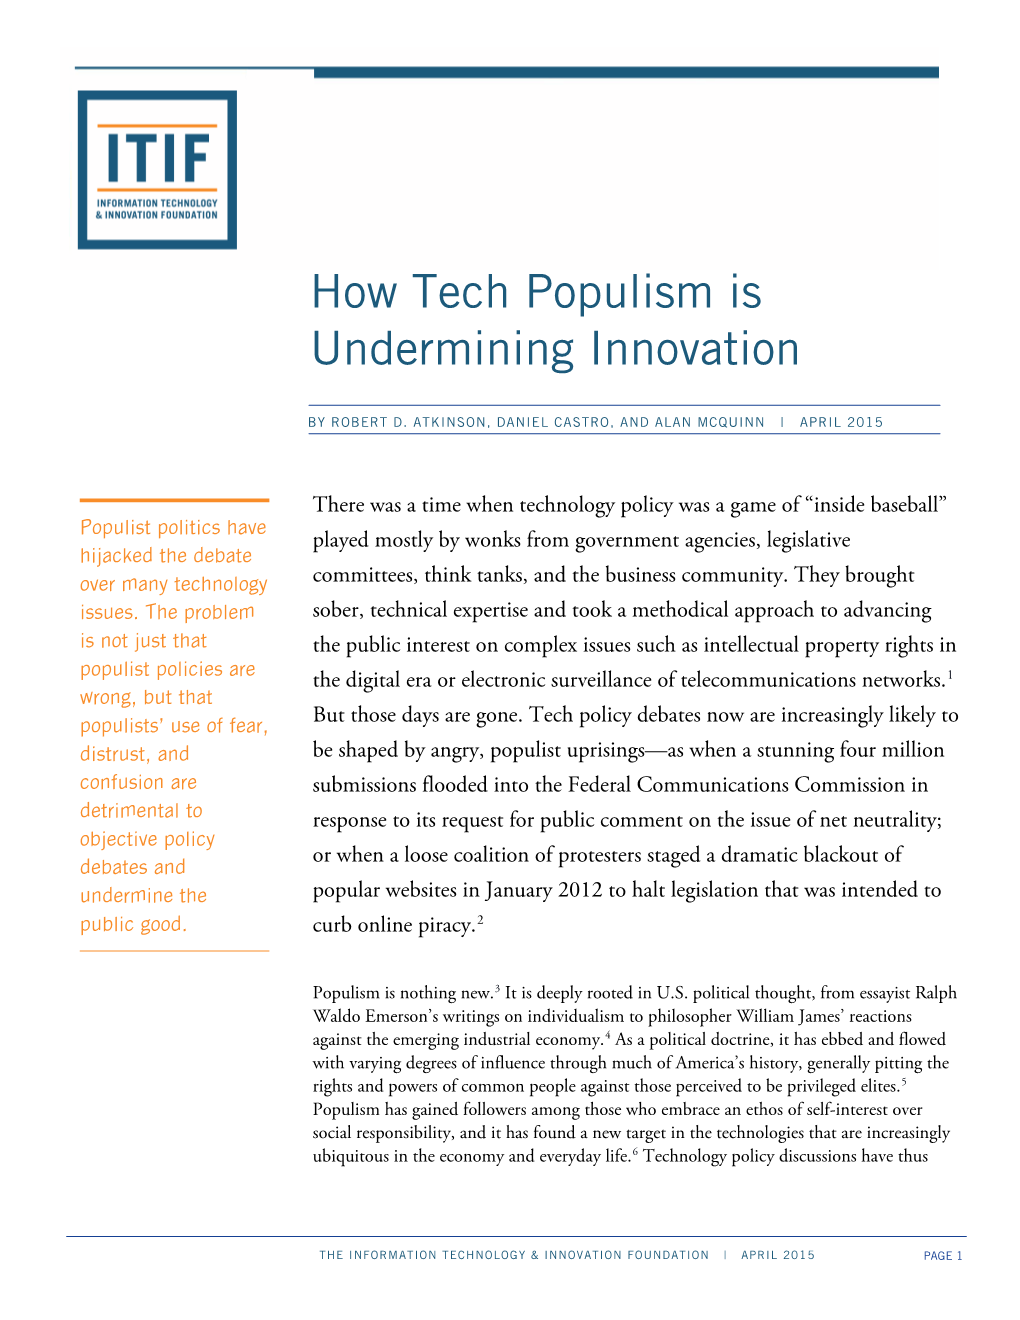 How Tech Populism Is Undermining Innovation